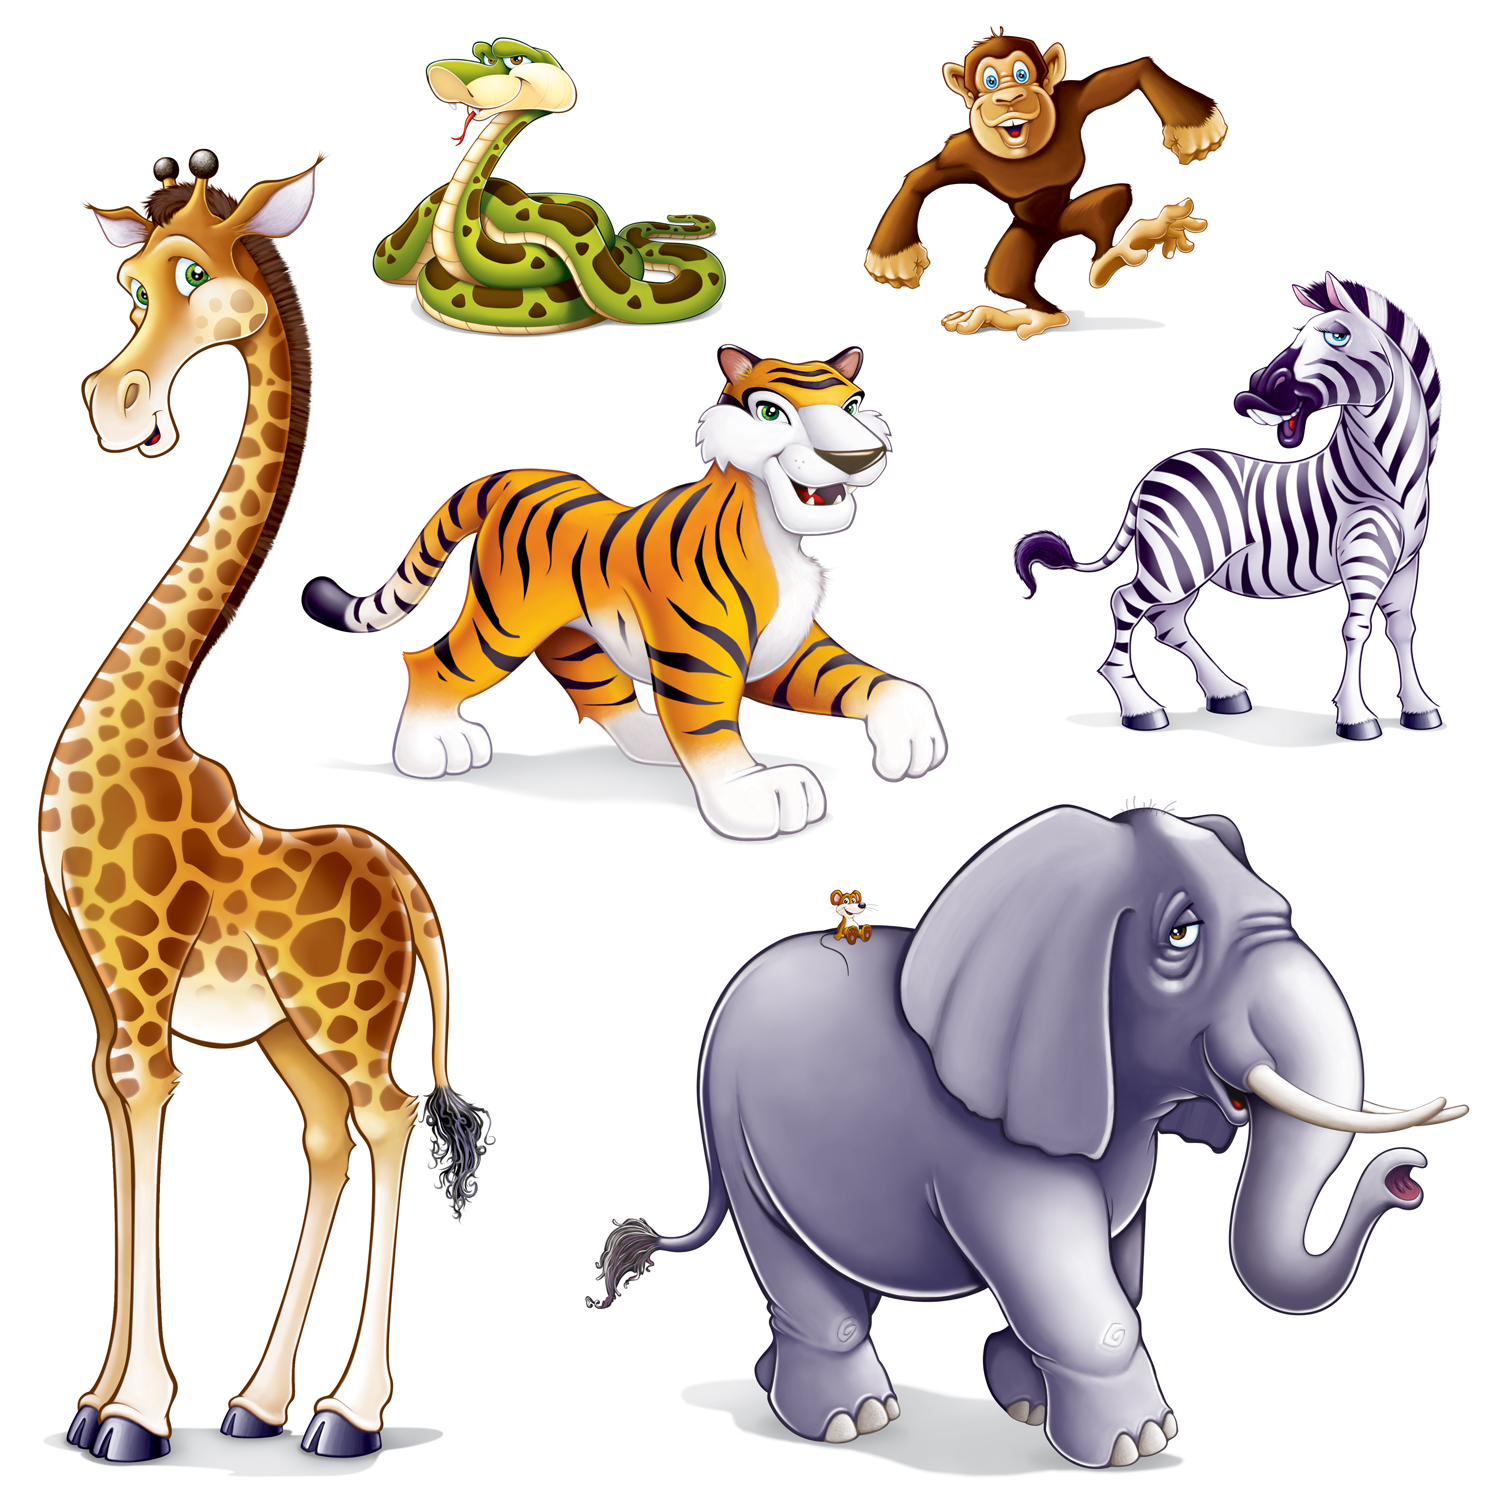 Baby Jungle Animals Clipart - Free Clipart Images